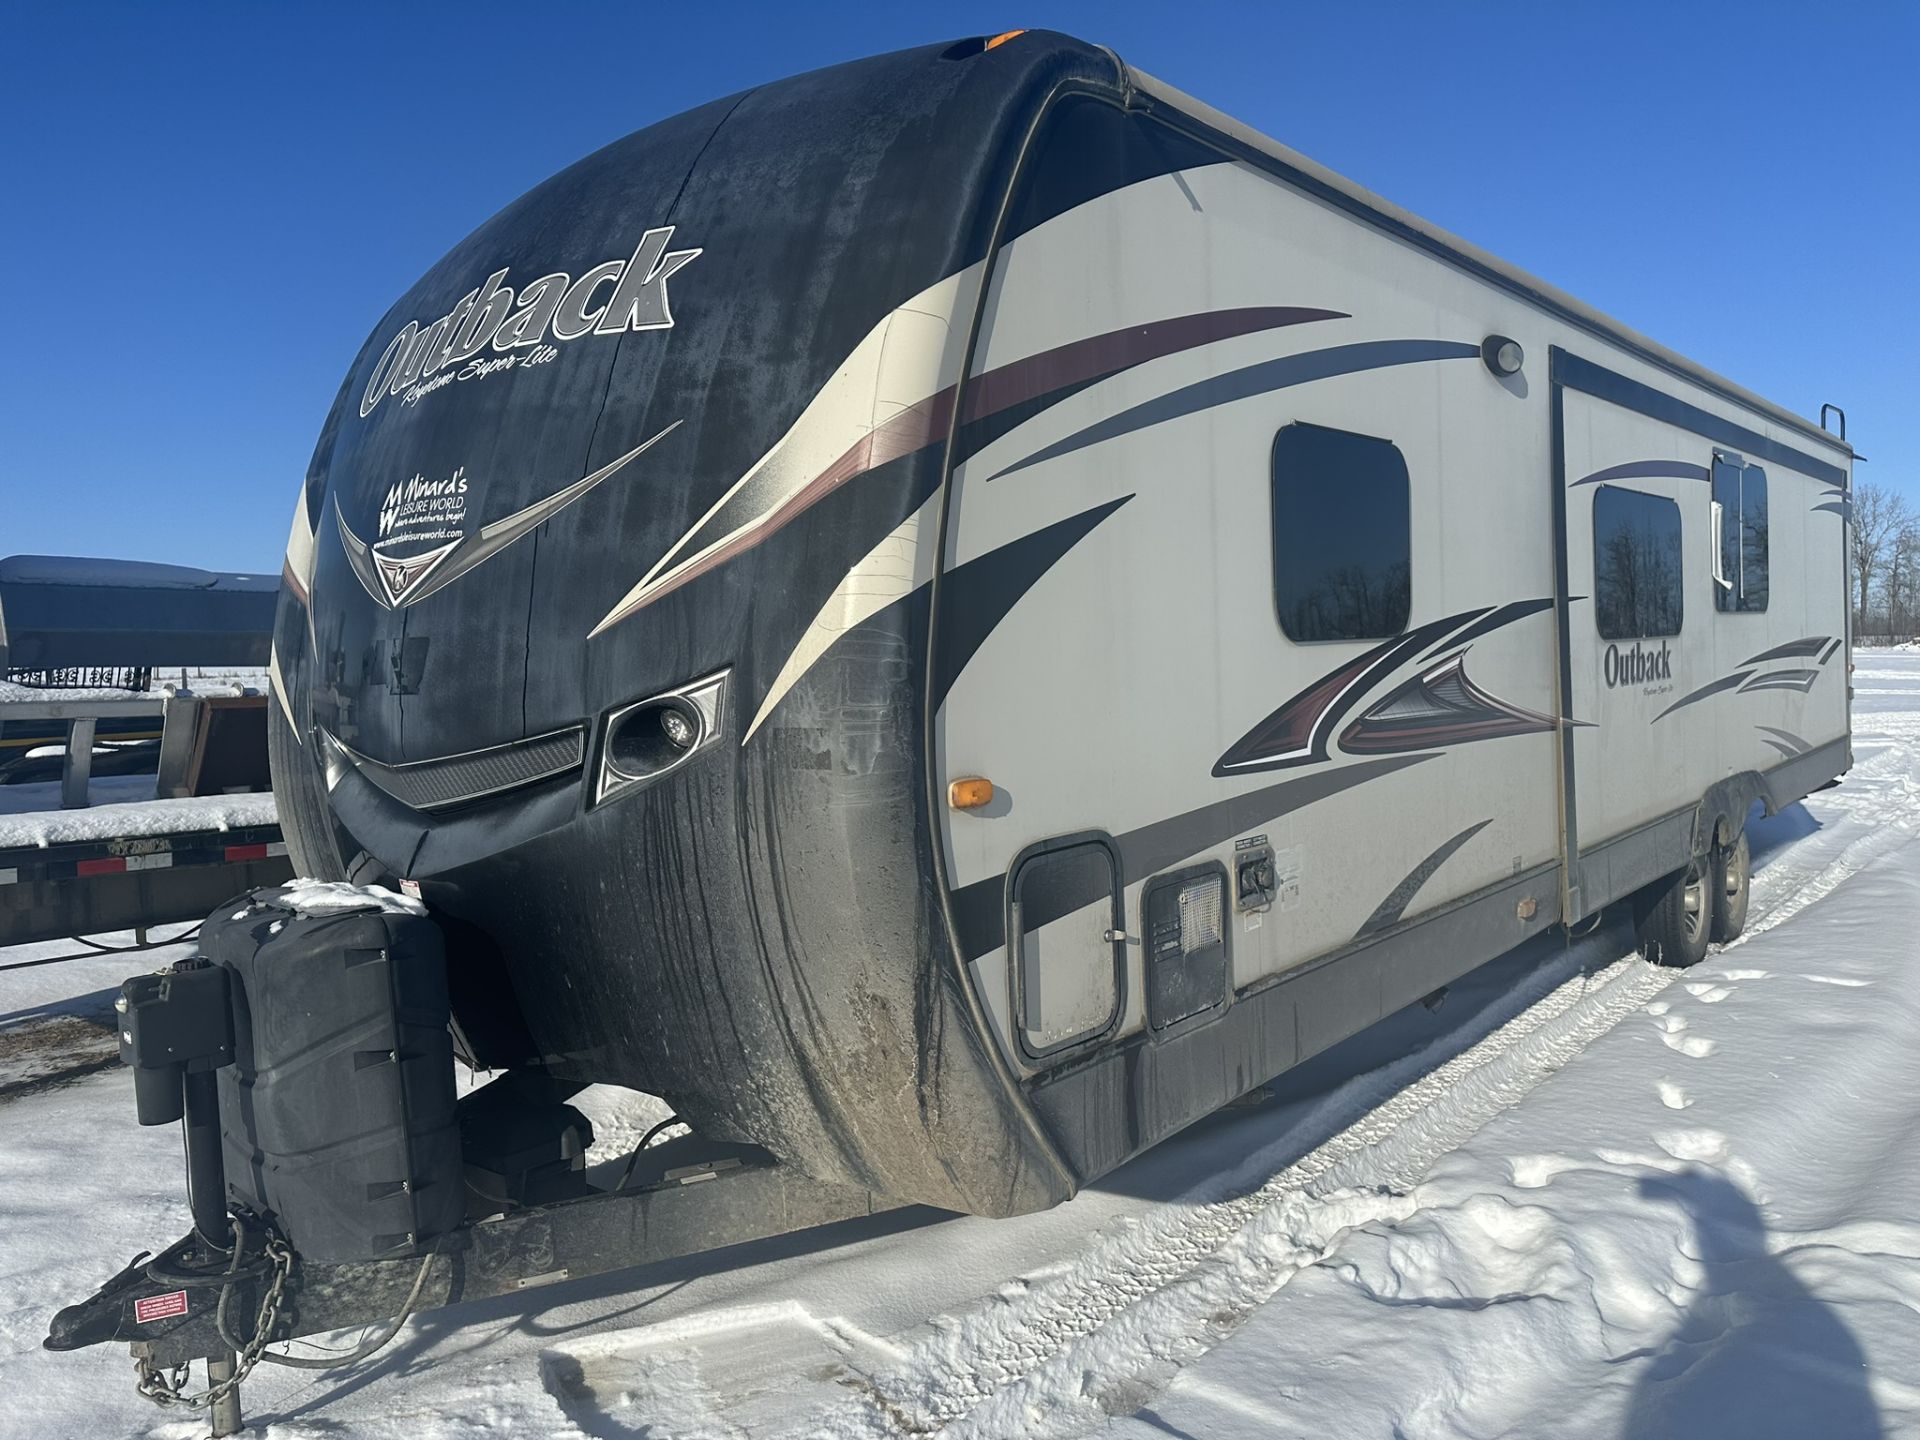 2014 OUTBACK KEYSTONE SUPER-LITE 33 FT HOLIDAY TRAILER, DOUBLE SLIDE, POWER AWNING, OUTDOOR KITCHEN, - Image 13 of 15